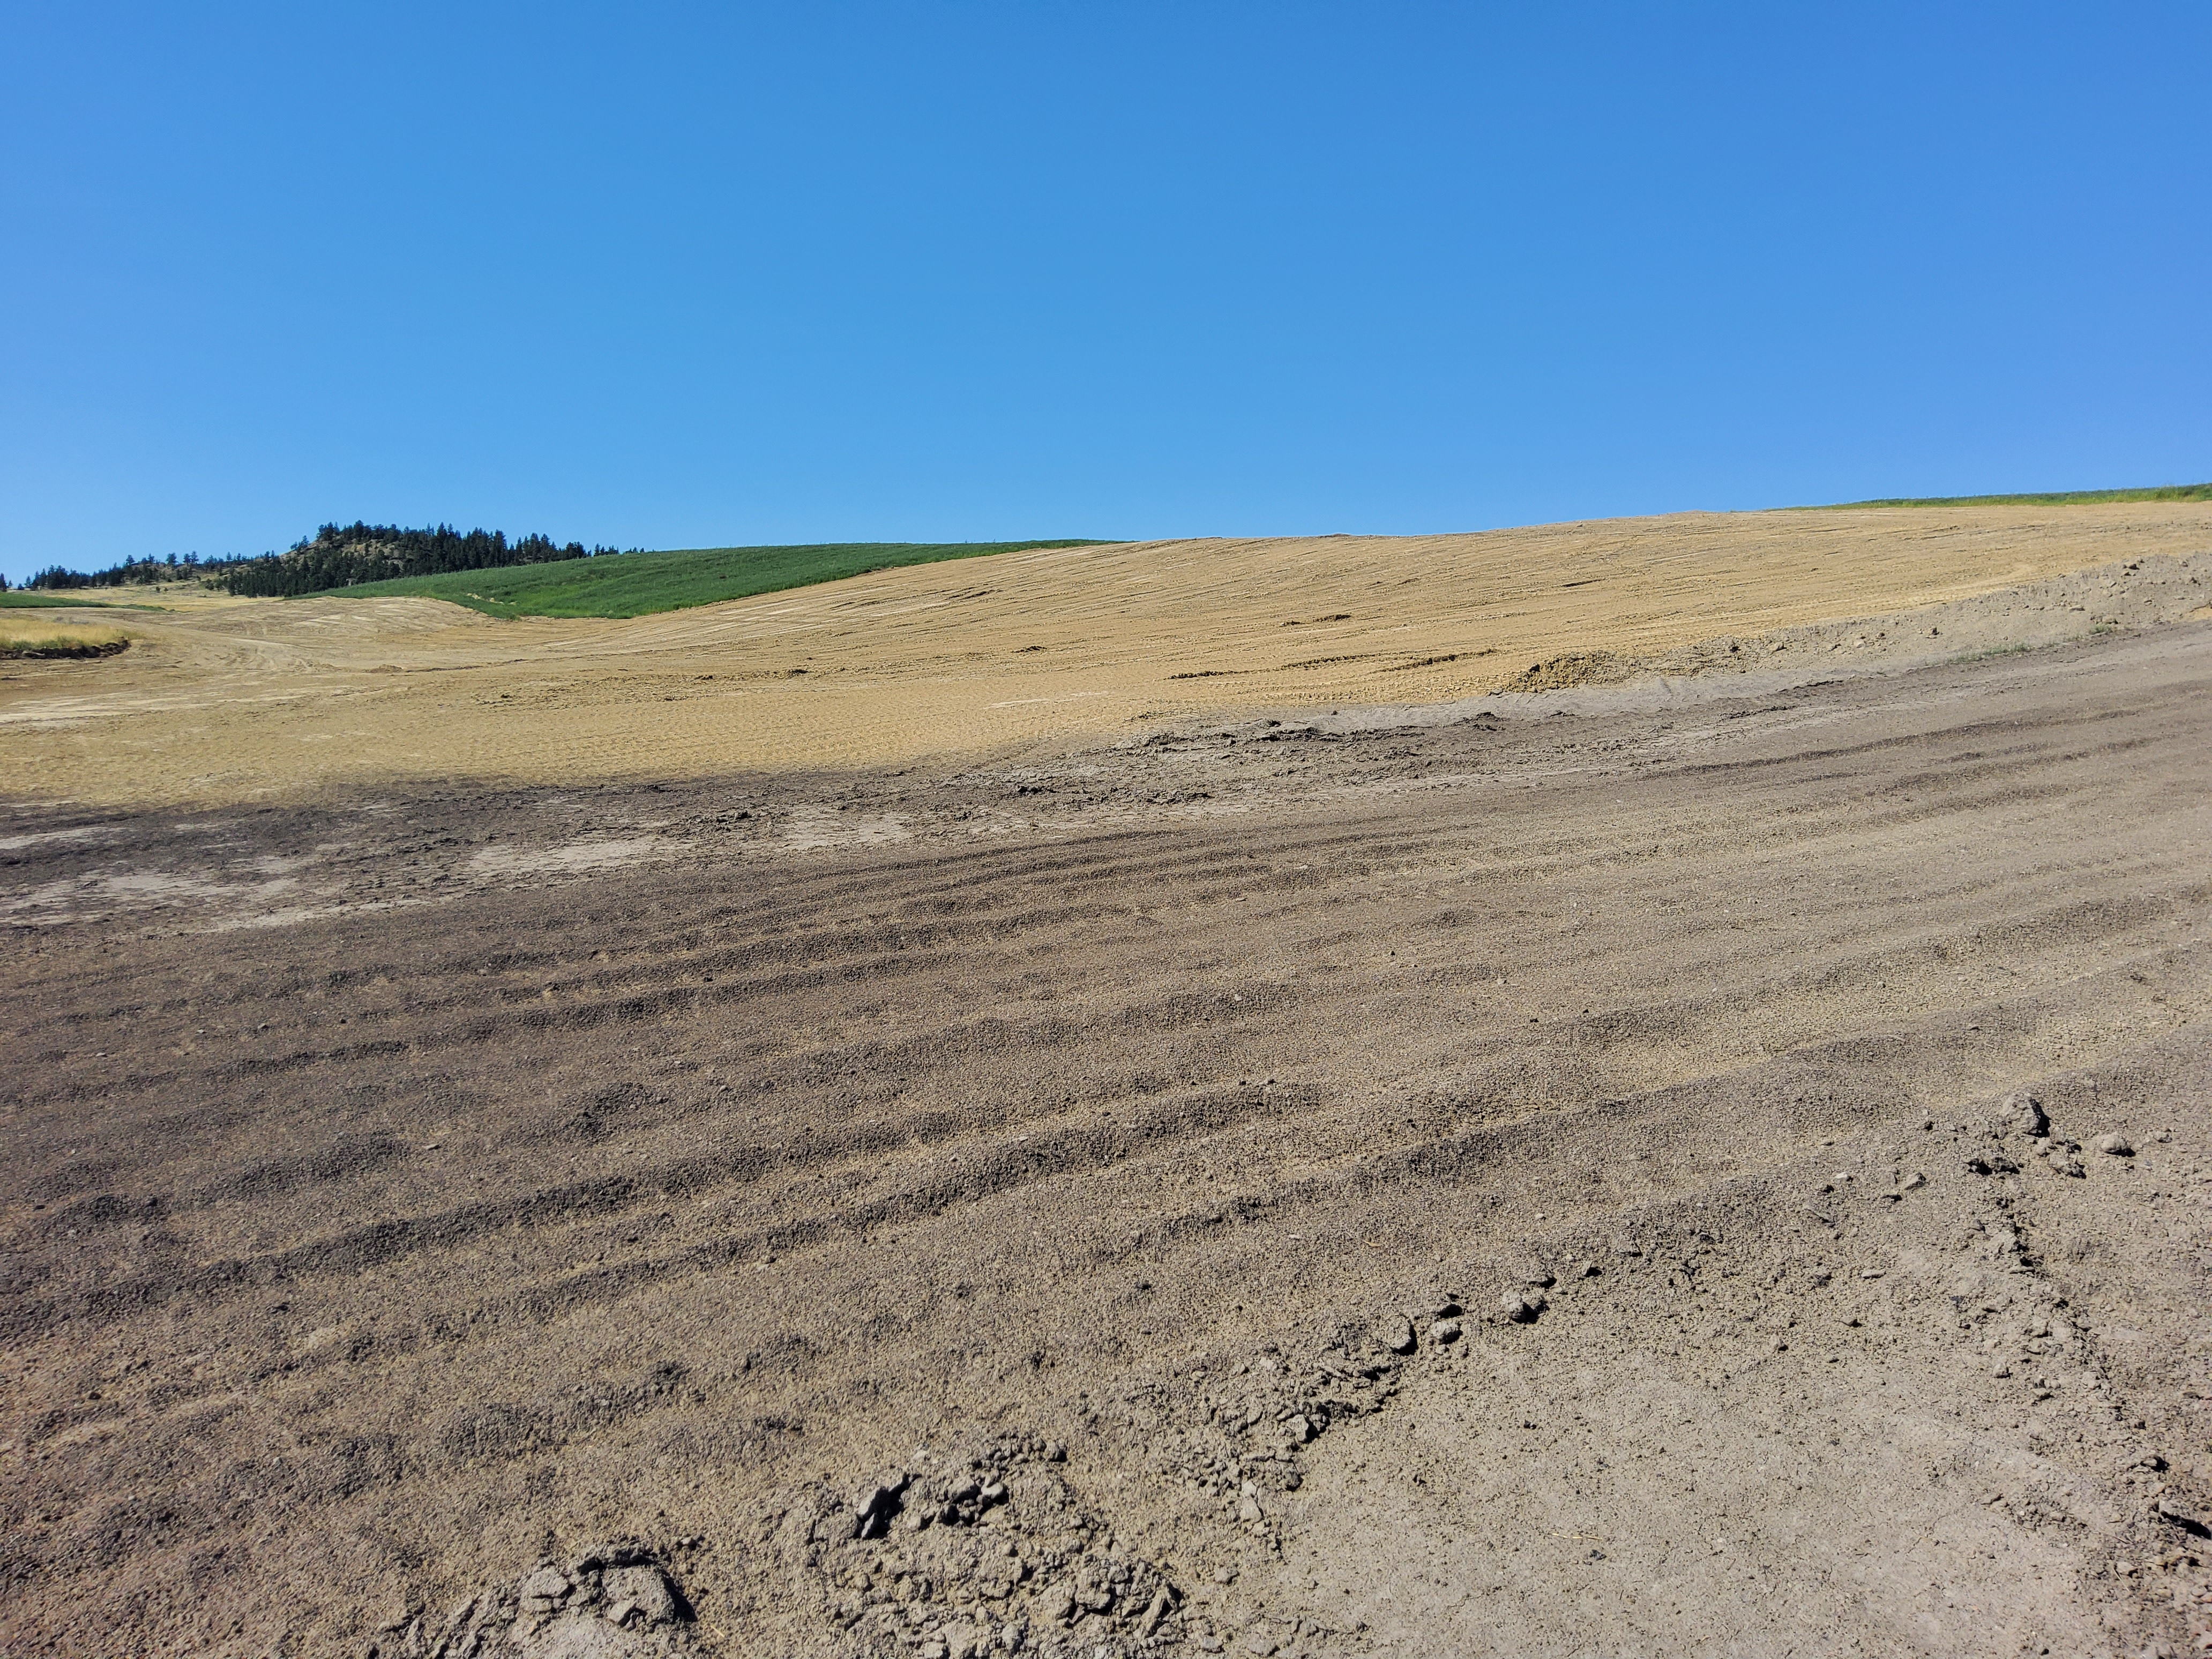 Photograph showing various stages of reclamation at the Absaloka South Mine on Crow Land.  From background to foreground it shows undisturbed trees, re-vegetation, topsoil laydown and graded spoil  on a hill landscape. 